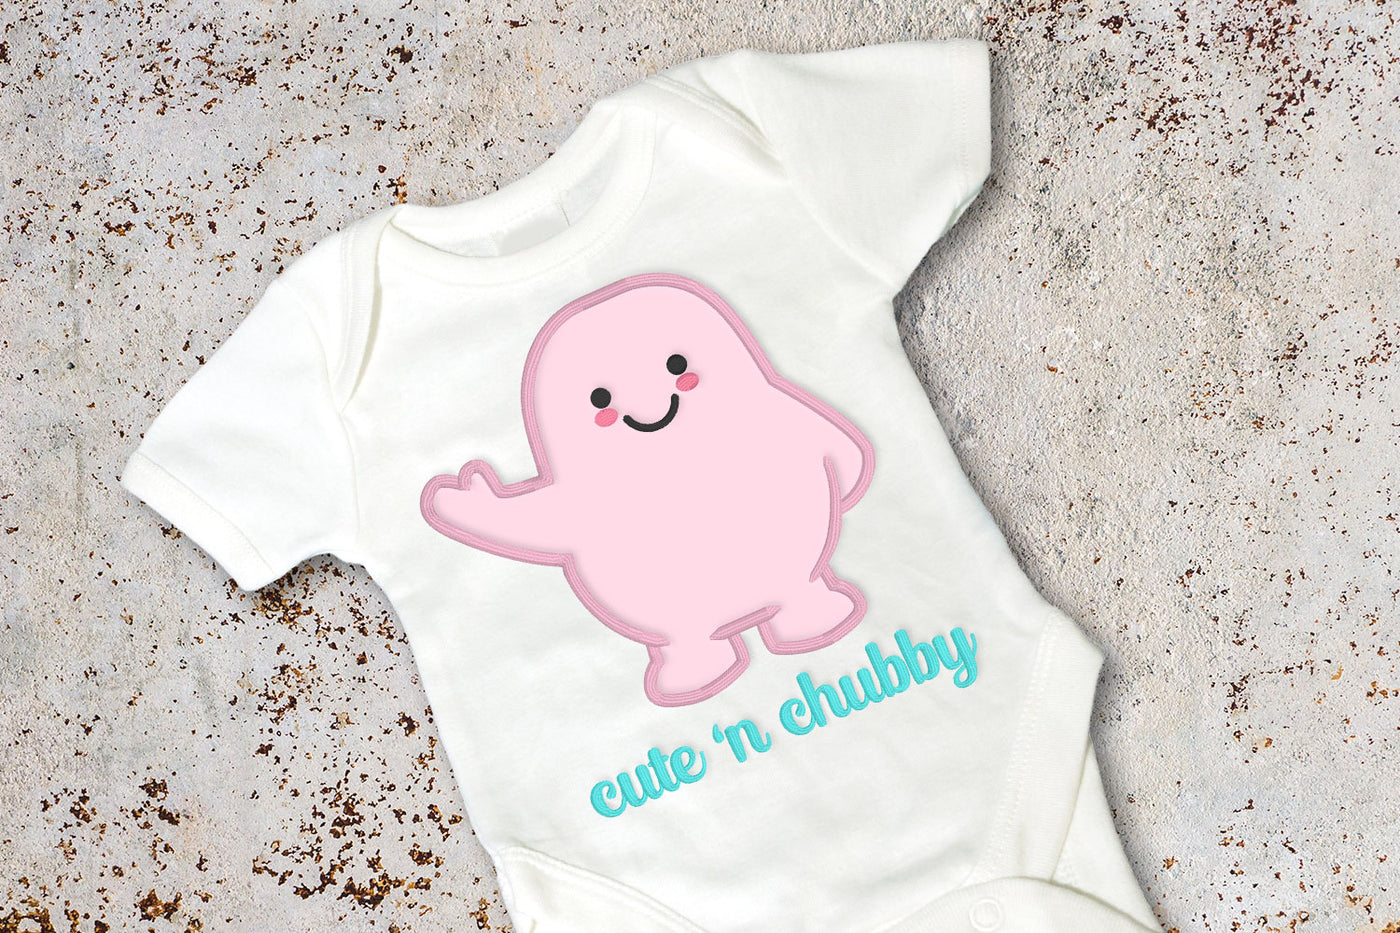 Cute n Chubby Creature Applique and Embroidery Design